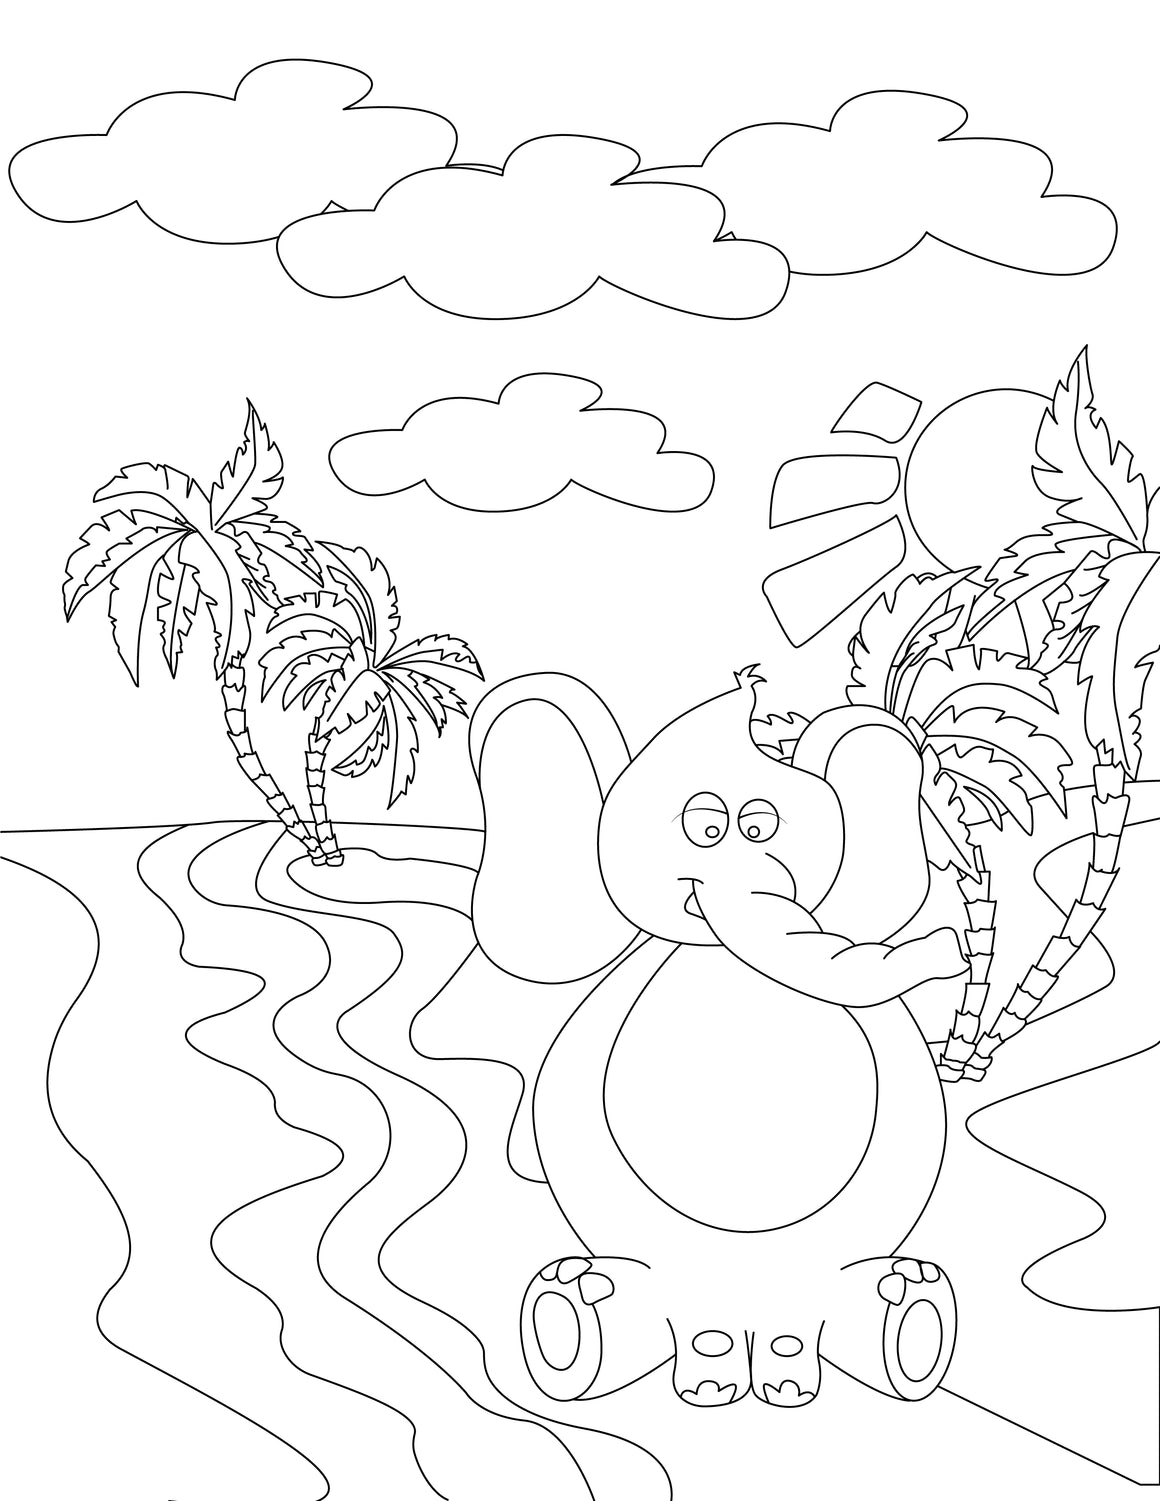 Elephant Coloring Page 5/2/2022